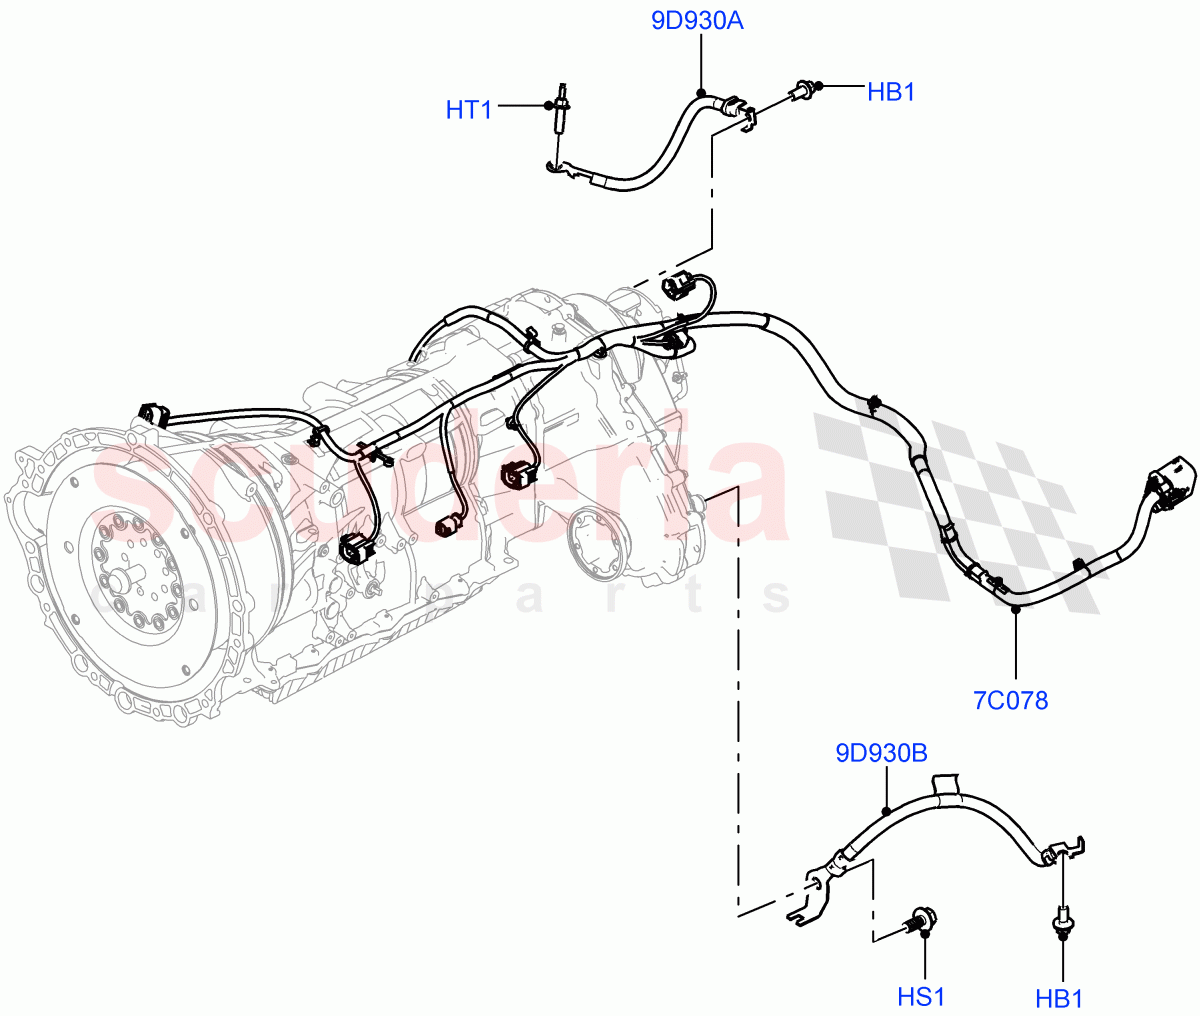 Transmission Harness(Solihull Plant Build)((V)FROMHA000001) of Land Rover Land Rover Discovery 5 (2017+) [3.0 Diesel 24V DOHC TC]